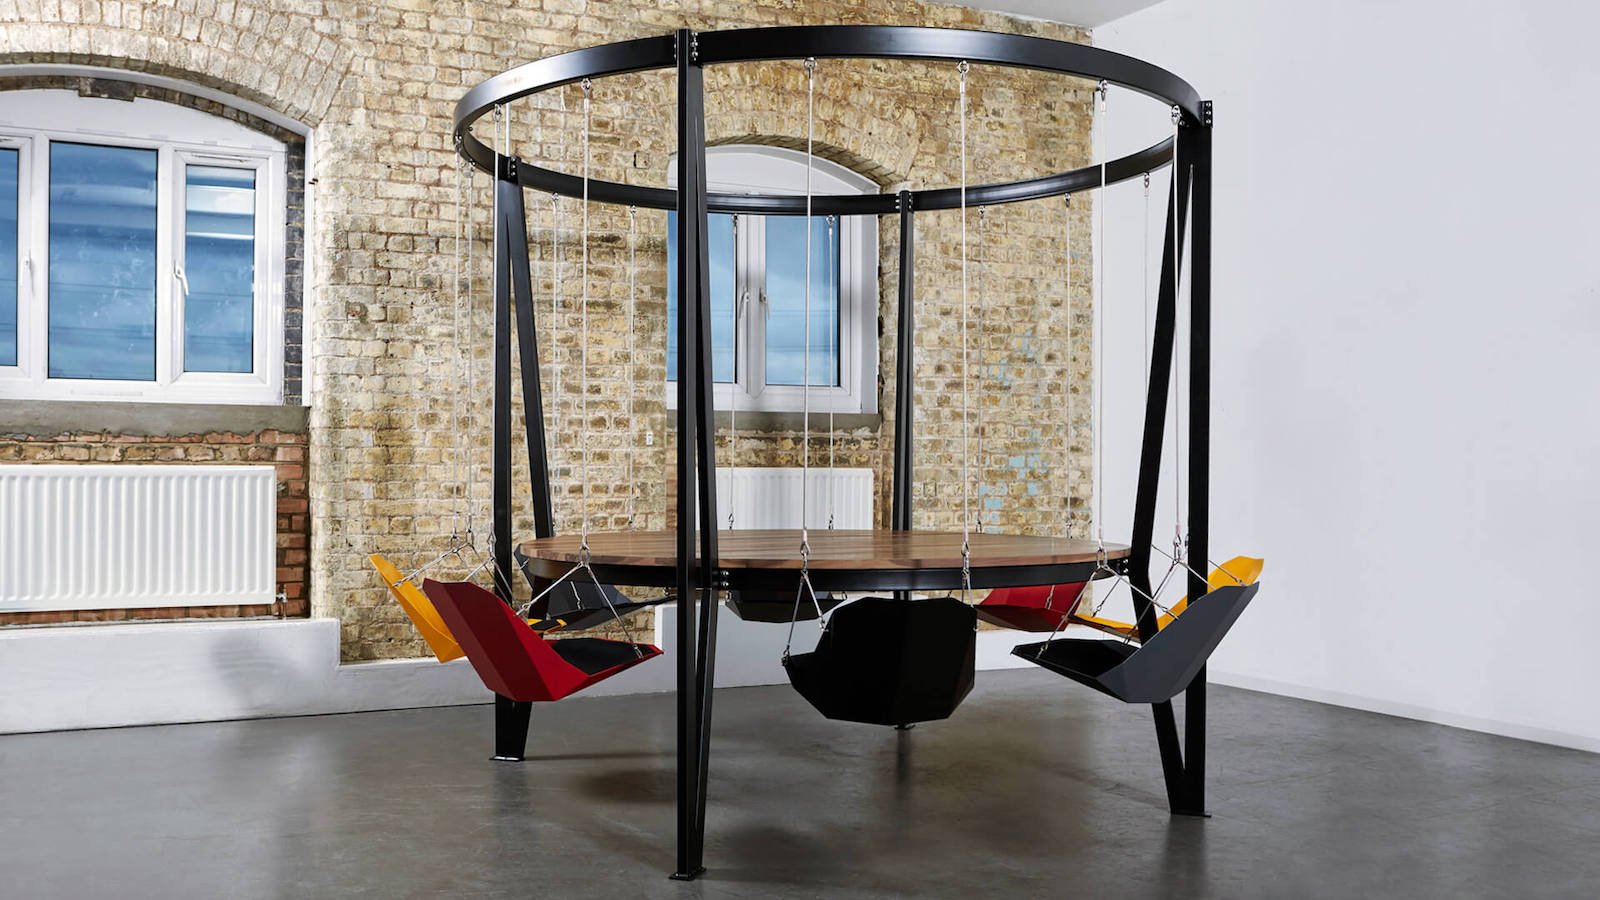 This King Arthur swinging table makes sitting more exciting